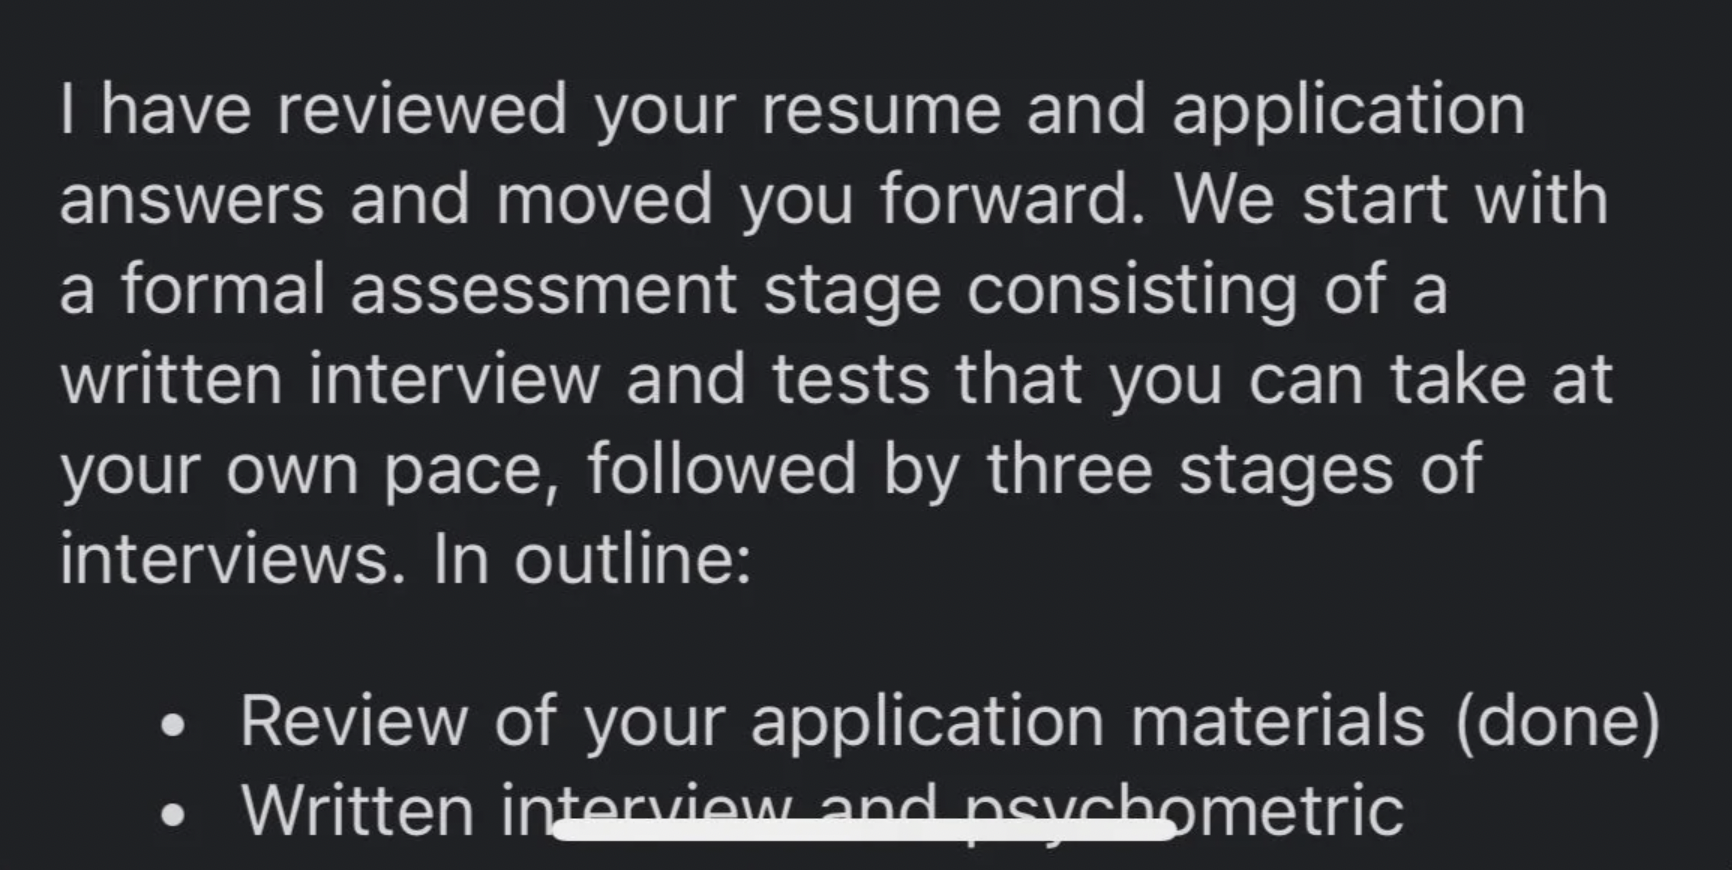 I have reviewed your resume and application answers and moved you forward. We start with a formal assessment stage consisting of a written interview and tests that you can take at your own pace, ed by three stages of interviews. In outline Review of your…